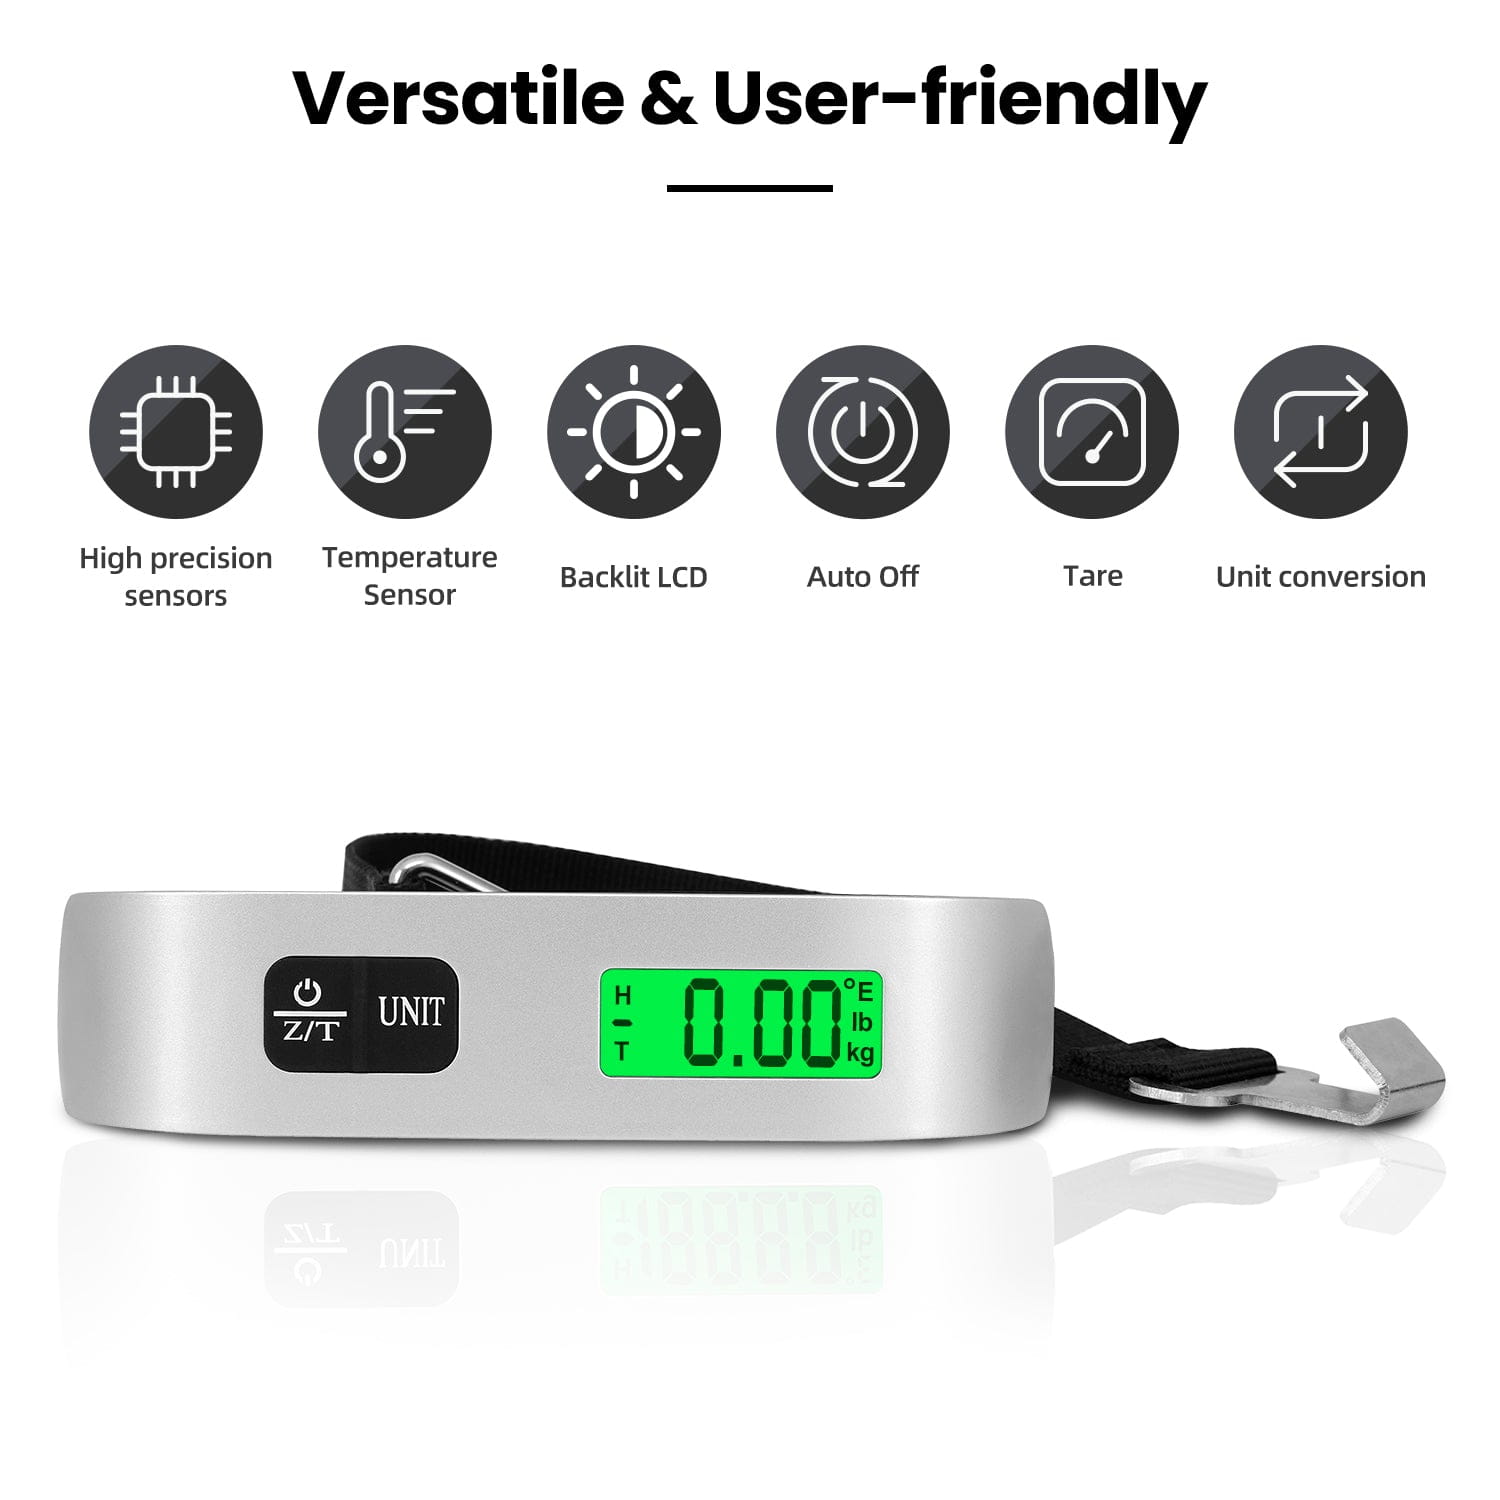  Electronic Handheld Luggage Weighing Scale LCD Display